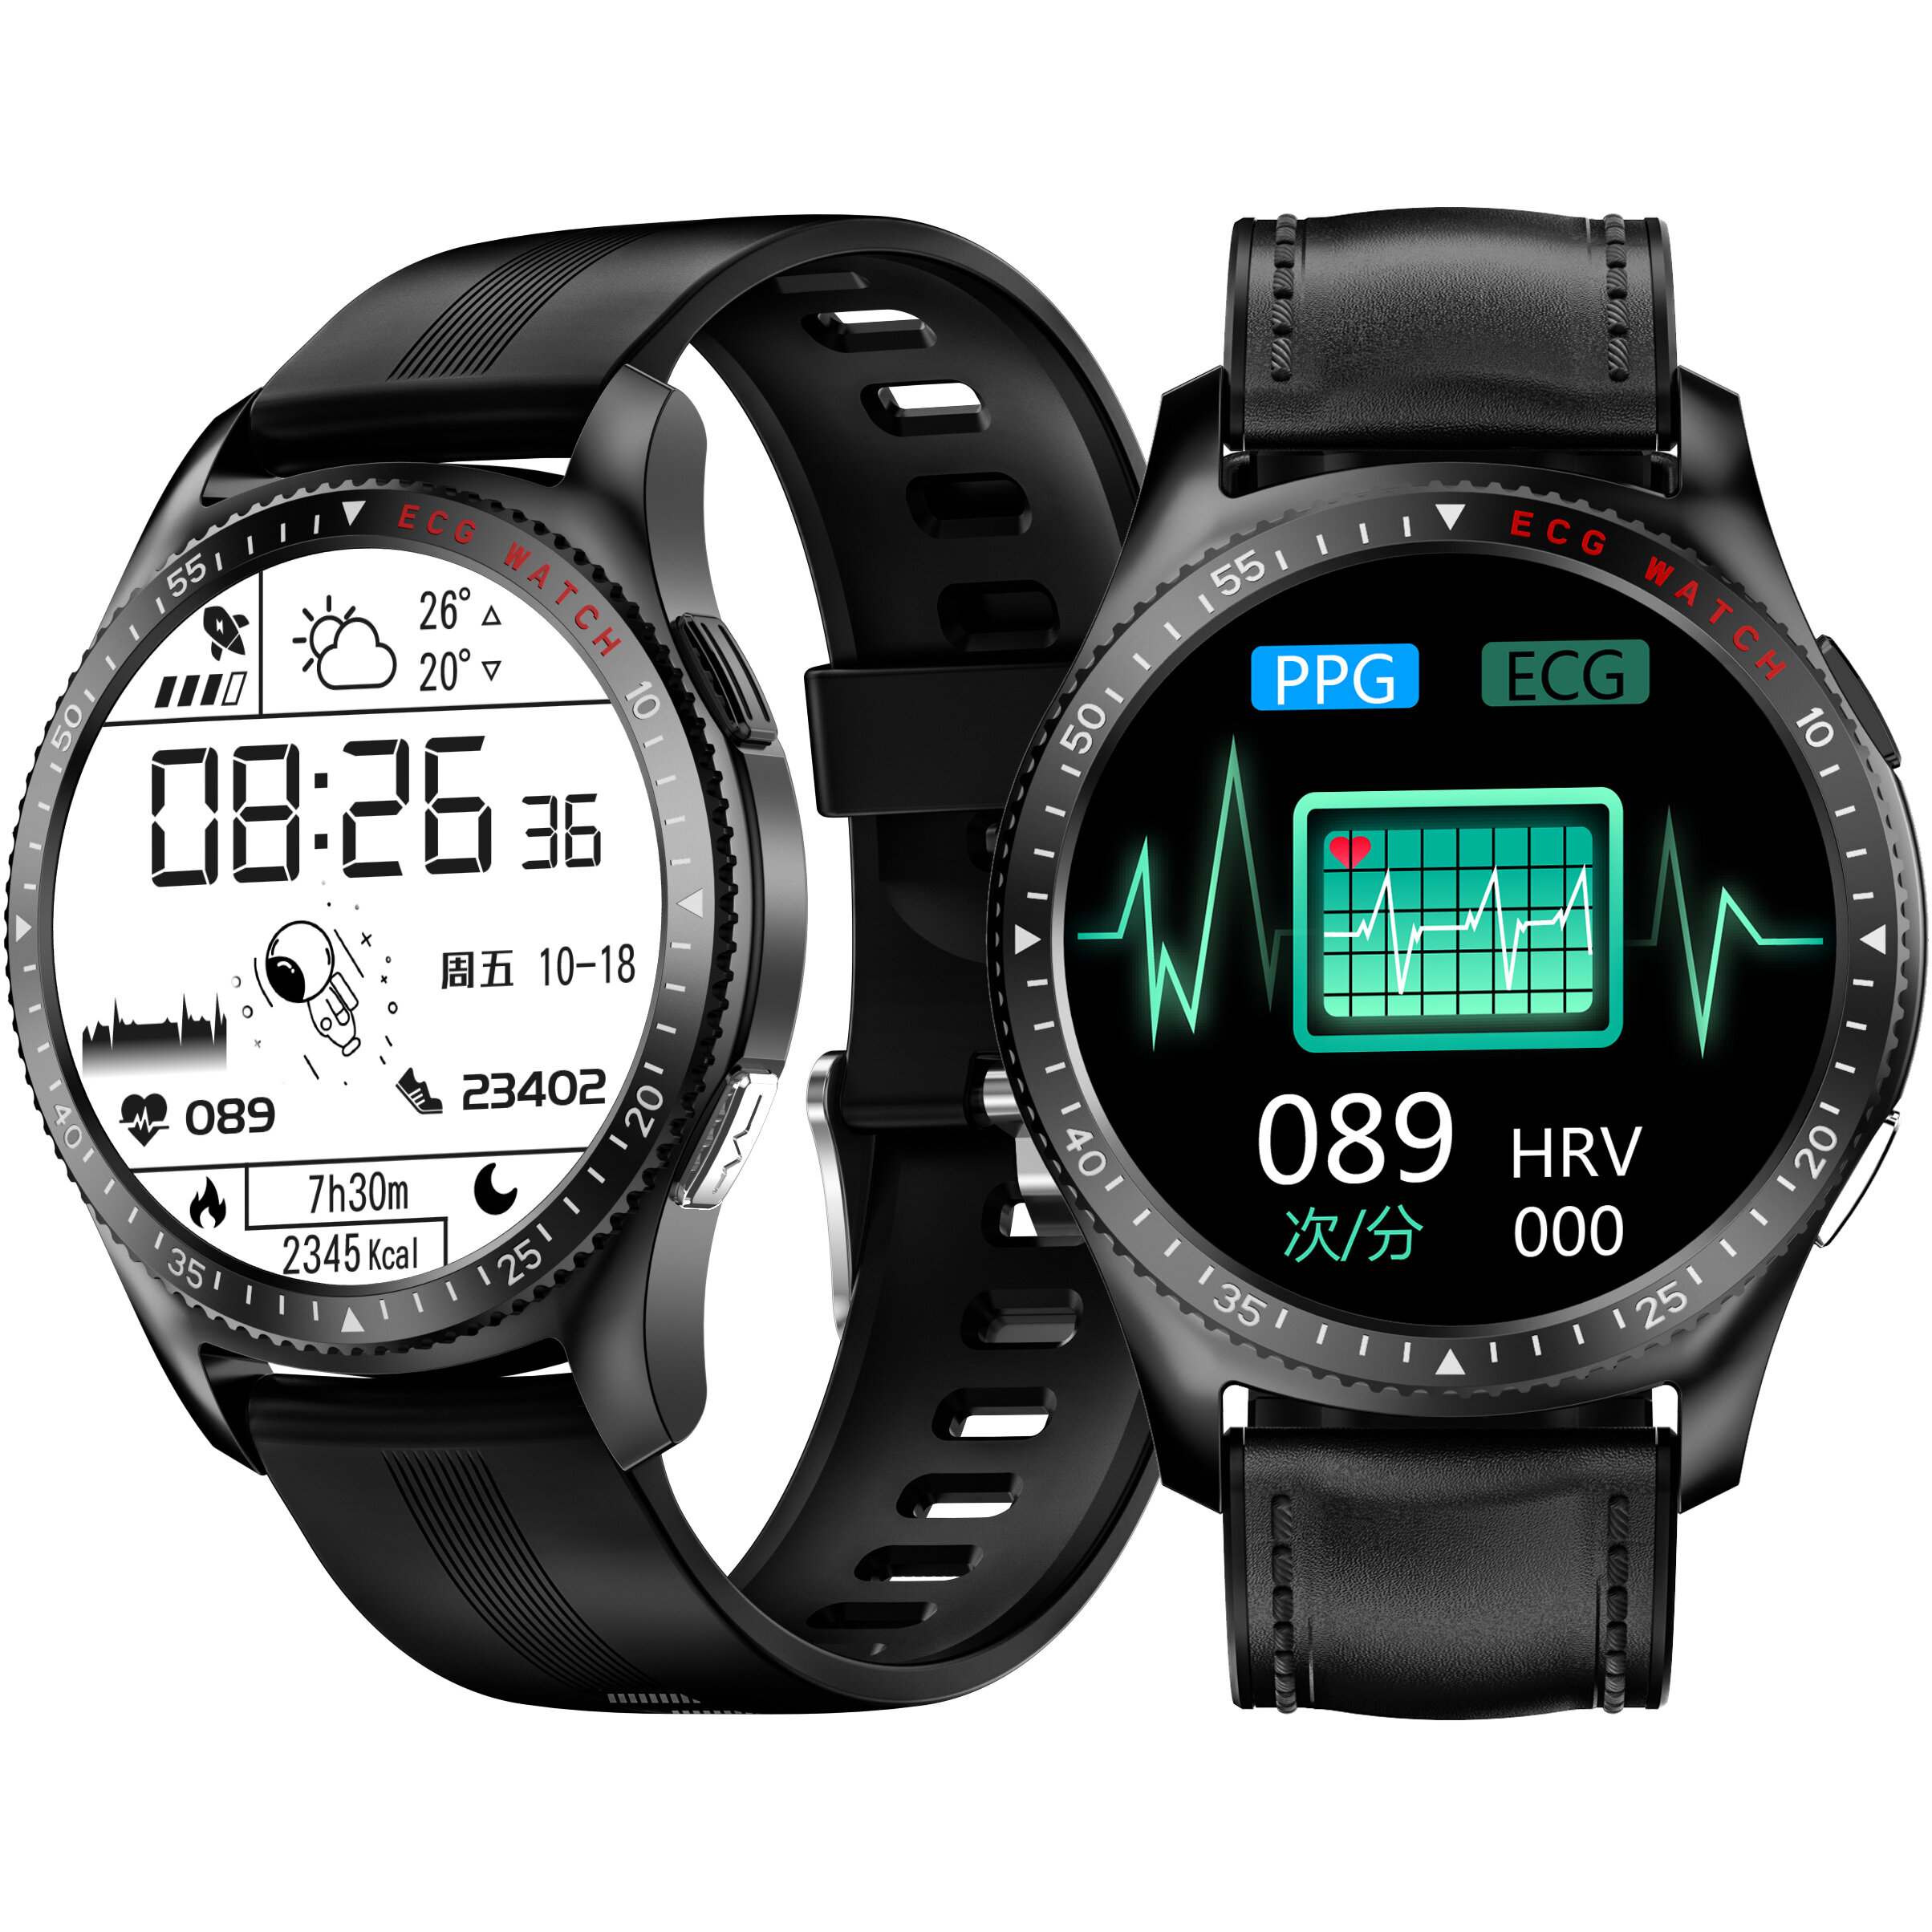 

Bakeey ES08 1.28 inch Full-Touch Screen ECG+PPG Heart Rate Blood Pressure Oxygen Respiratory Rate Monitor BT Call IP67 W